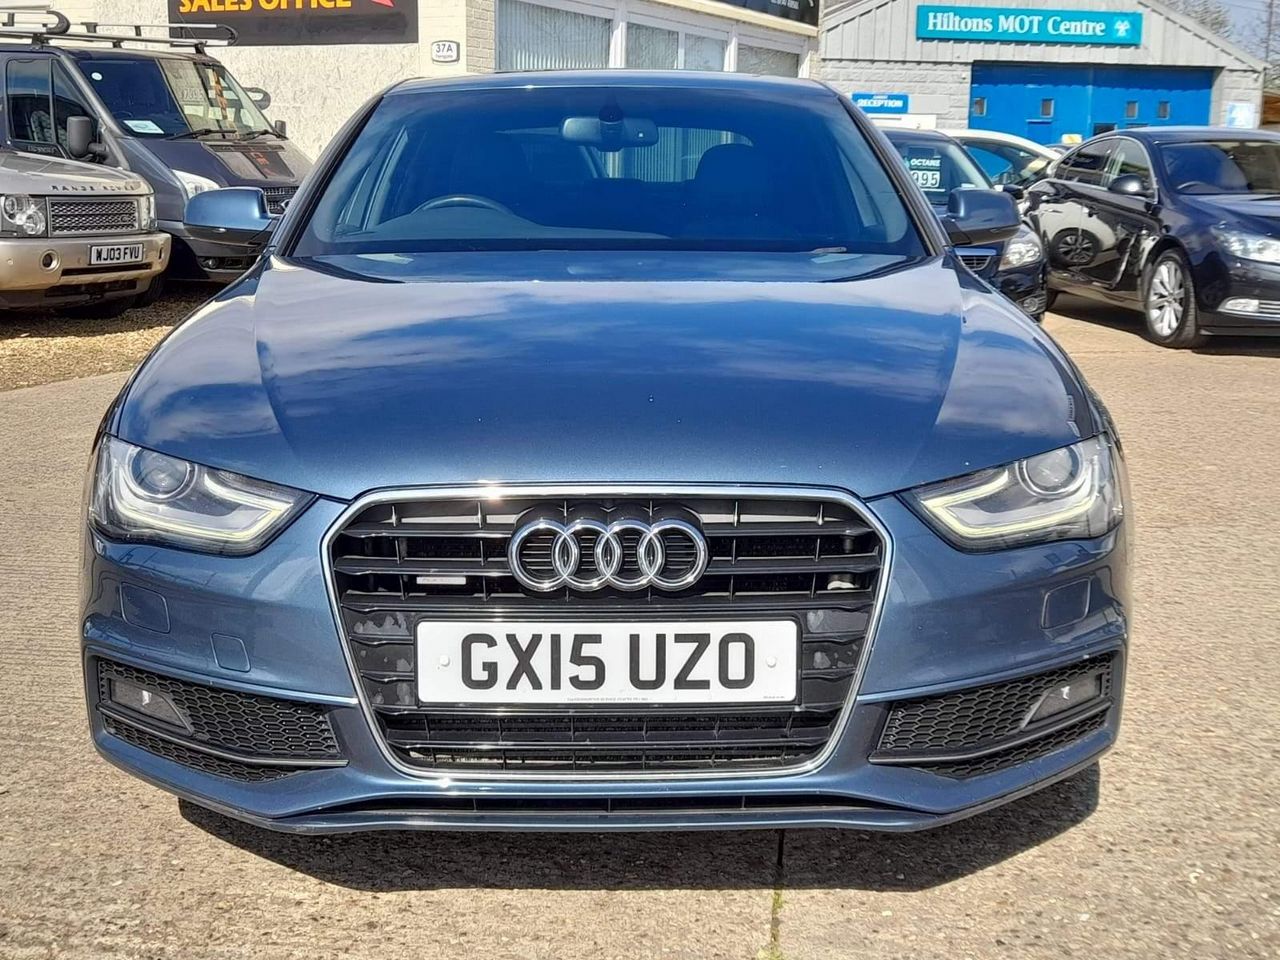 2015 Audi A4 3.0 TDI V6 S line S Tronic quattro Euro 5 (s/s) 4dr - Picture 3 of 47